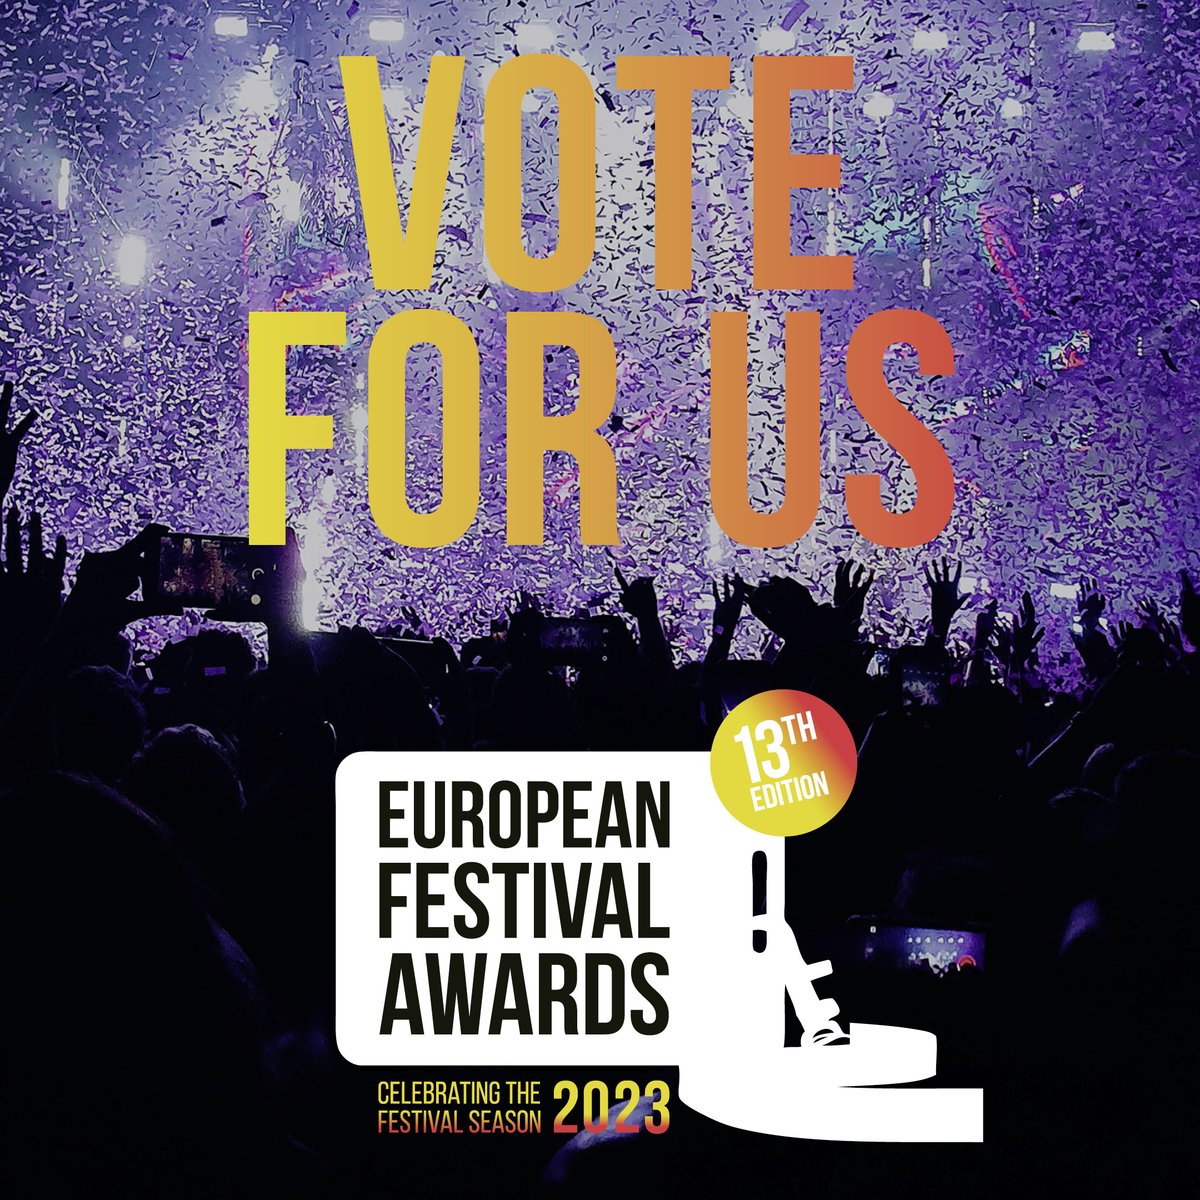 Diolch pawb : Thanks everyone 🎪 Vote for FOCUS Wales in the European Festival Awards! Delighted we're in the 'Best Small Festival' category for this, and we're in great company too! Voting is open at europeanfestivalawards.org/public-voting/ #Festival #Wales #Wrexham #NewMusic